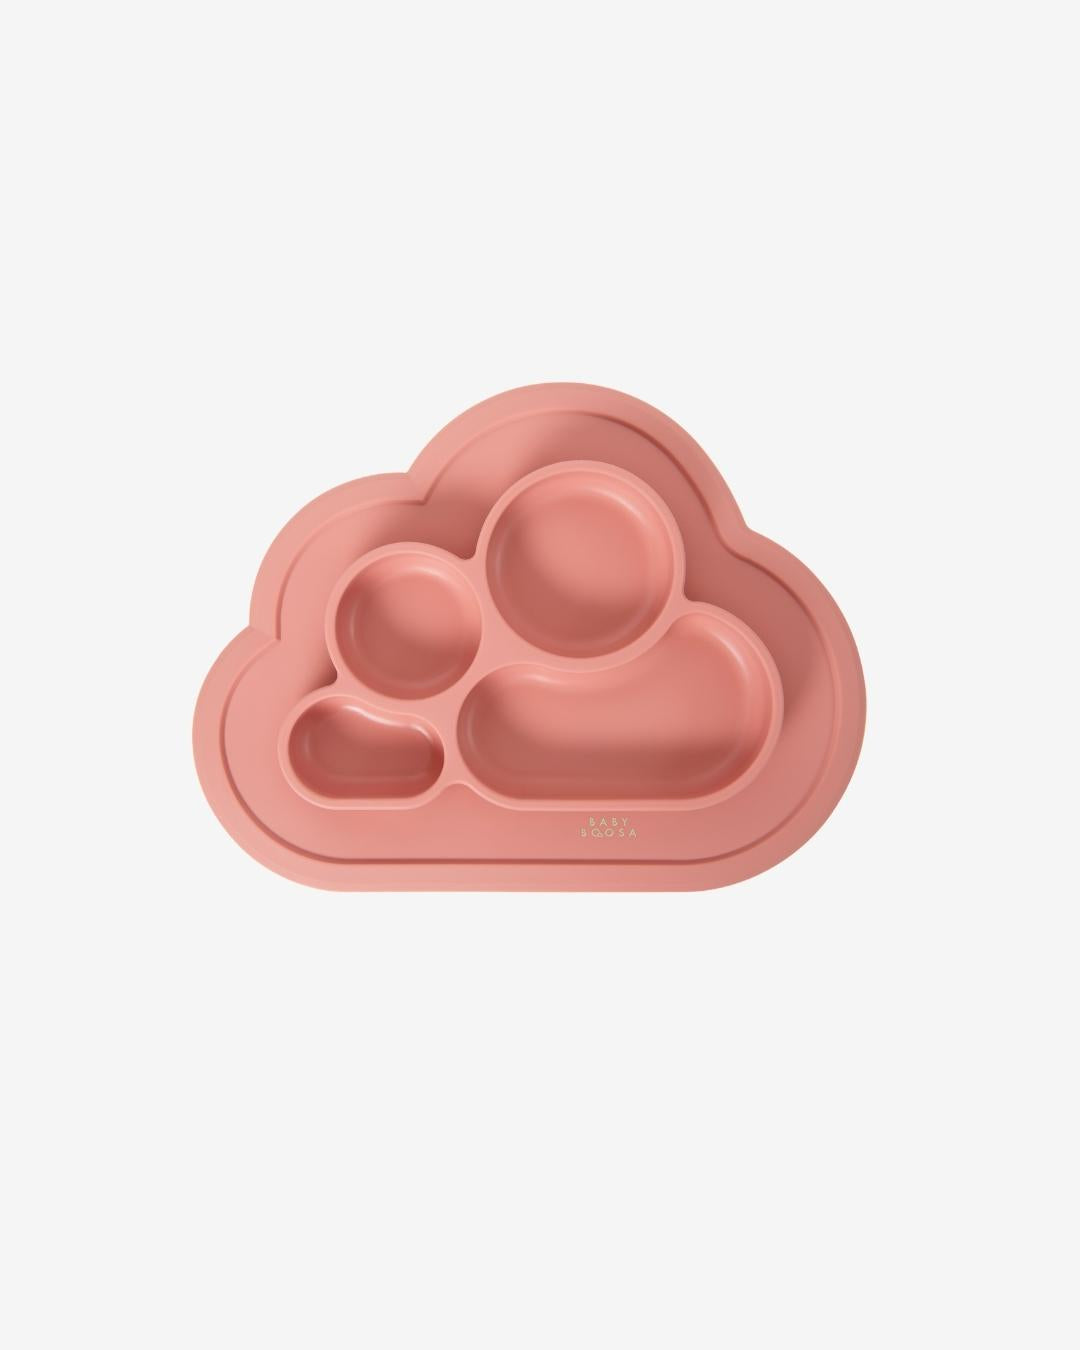 Weaning Cloud Plate Mat | Grippy Suction | Non-slip | Catch-food | Side scoops | Easy clean (Dusky Rose)